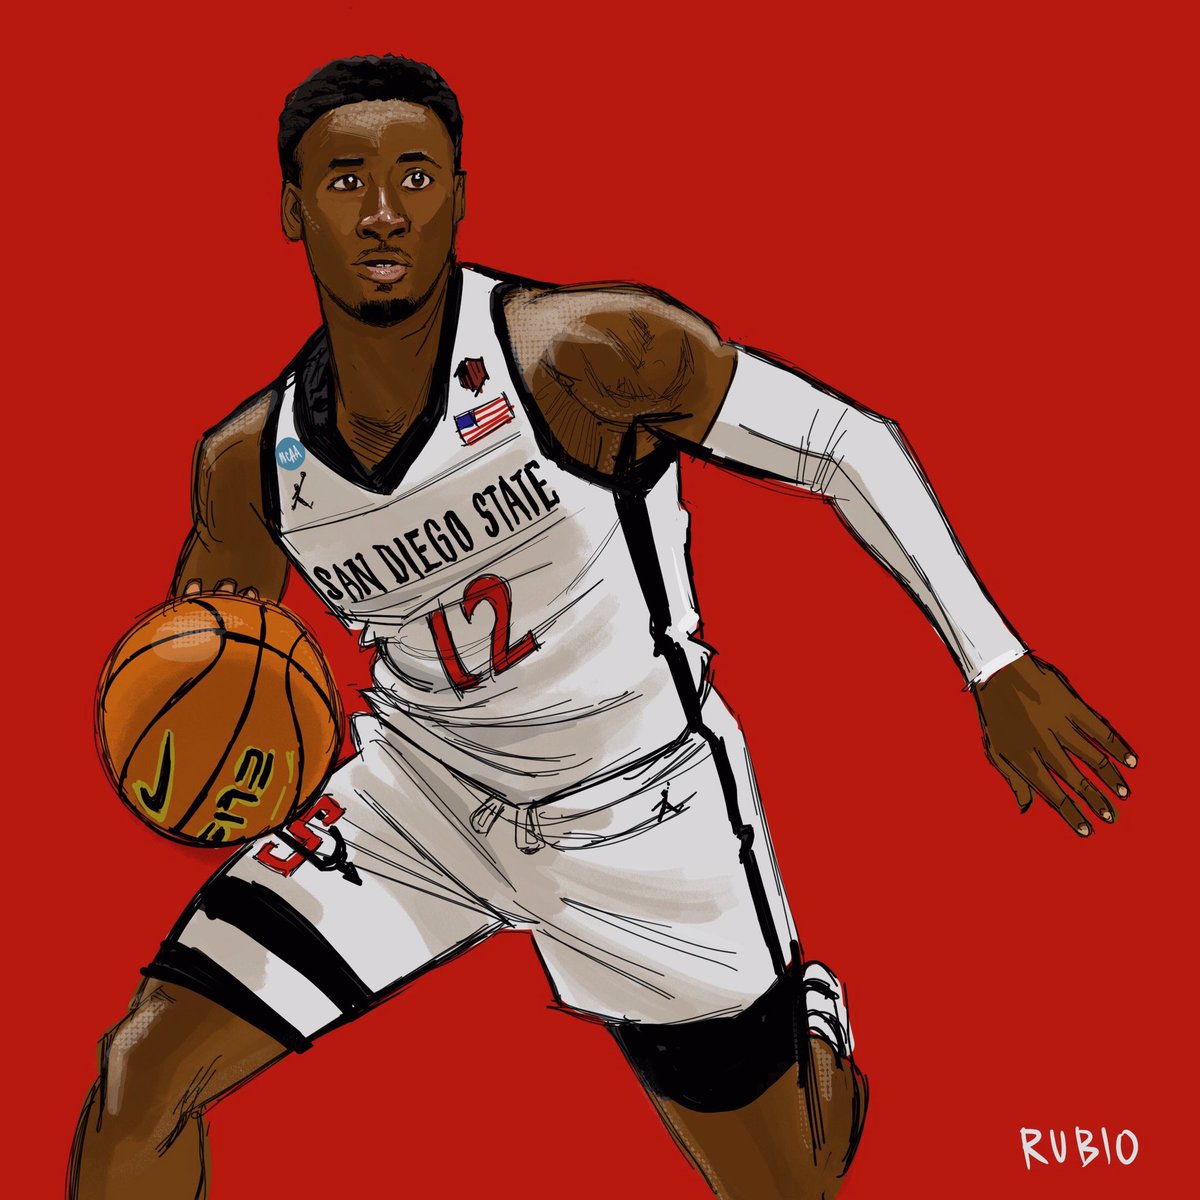 Victory Monday!
#FinalFour
Here’s your drawing of #DarrionTrammell
#SanDiegoStateBasketball 
#SouthRegionalChampions
#MarchMadness #NCAABasketball
I’m so happy for #SanDiegoStateUniversity #SDSUAlumni including my wife & brother #Samahan and my hometown of #SanDiego!
GO AZTECS!